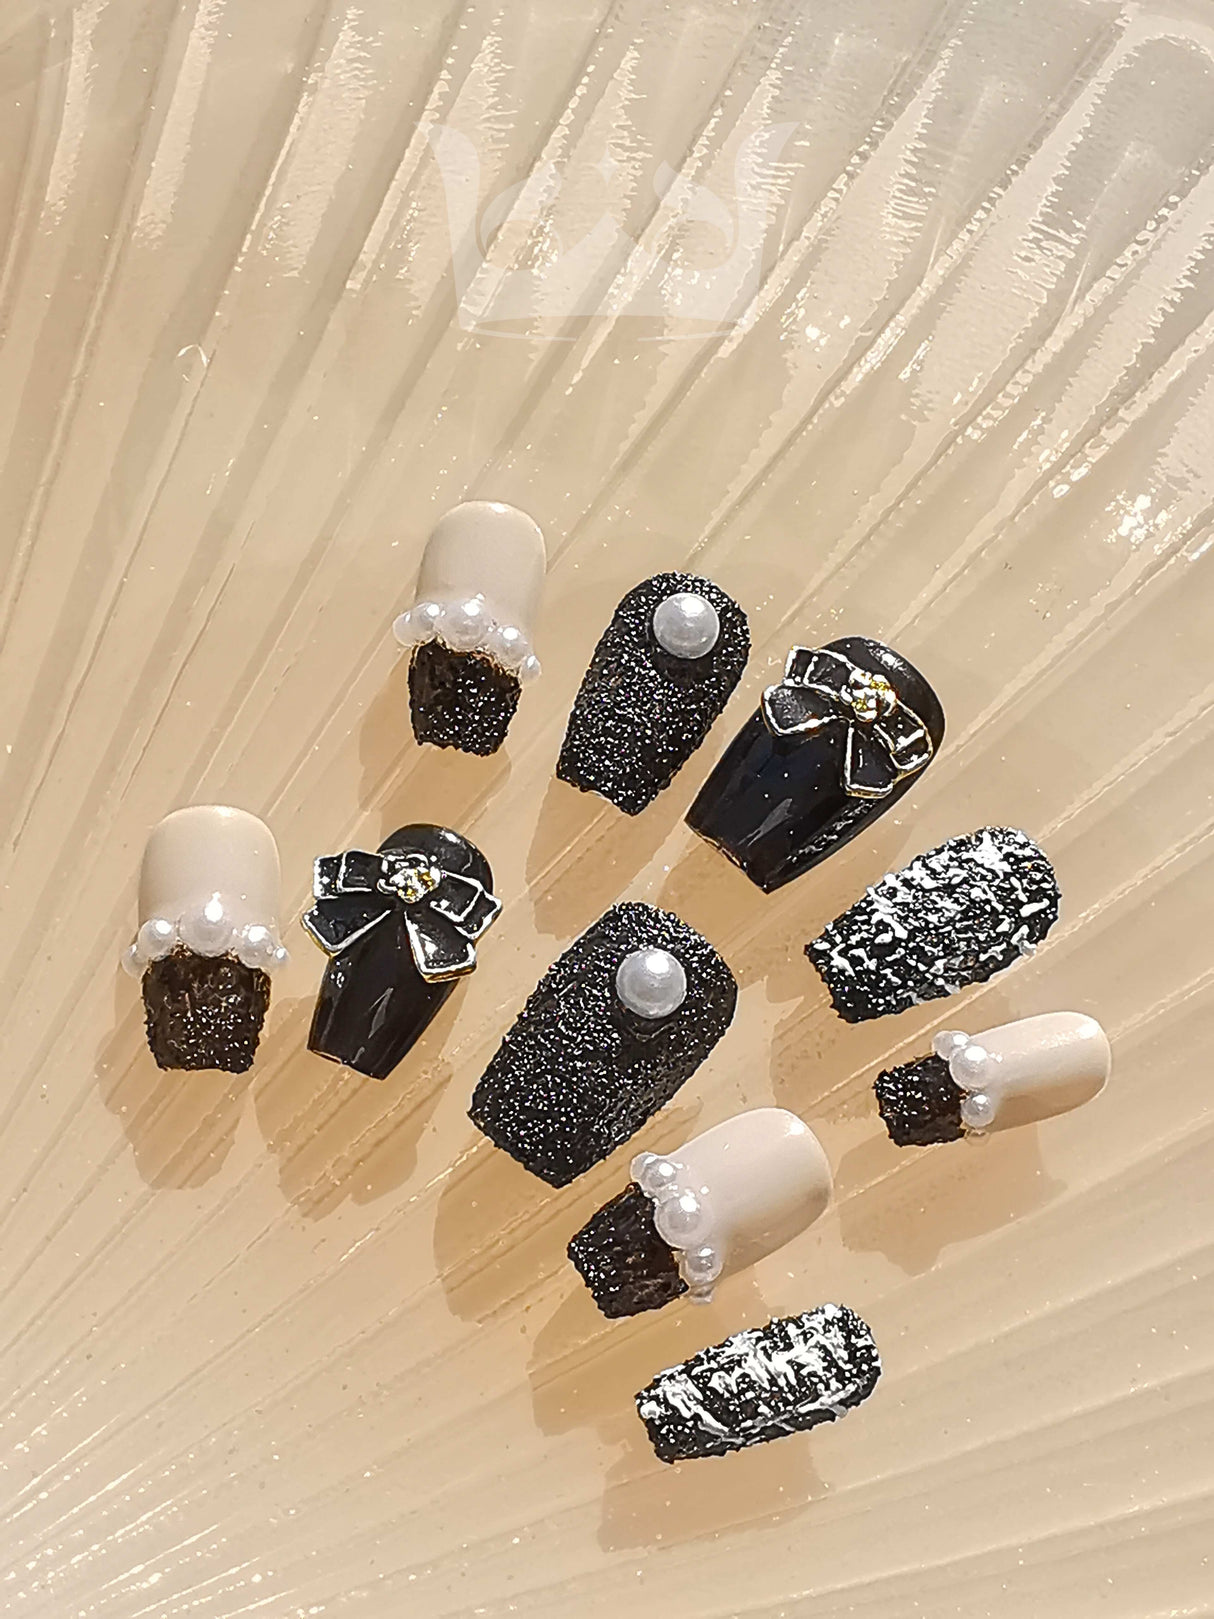 These press-on nails feature a fancy and glamorous design with a black and beige color scheme, 3D embellishments, and a marbled pattern.